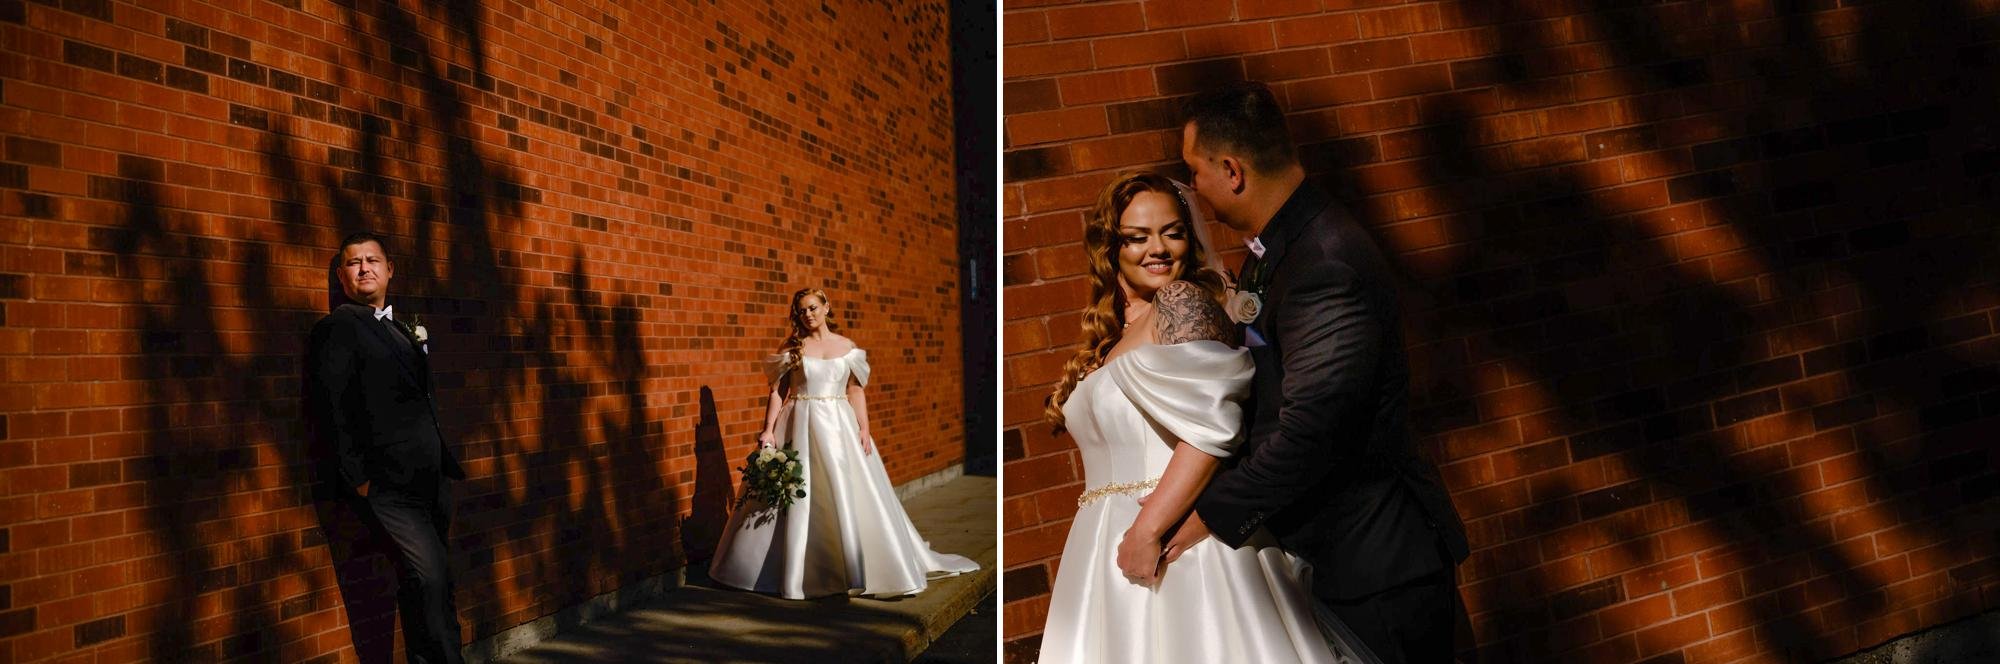 dramatic hard light wedding photo in front of a brick wall